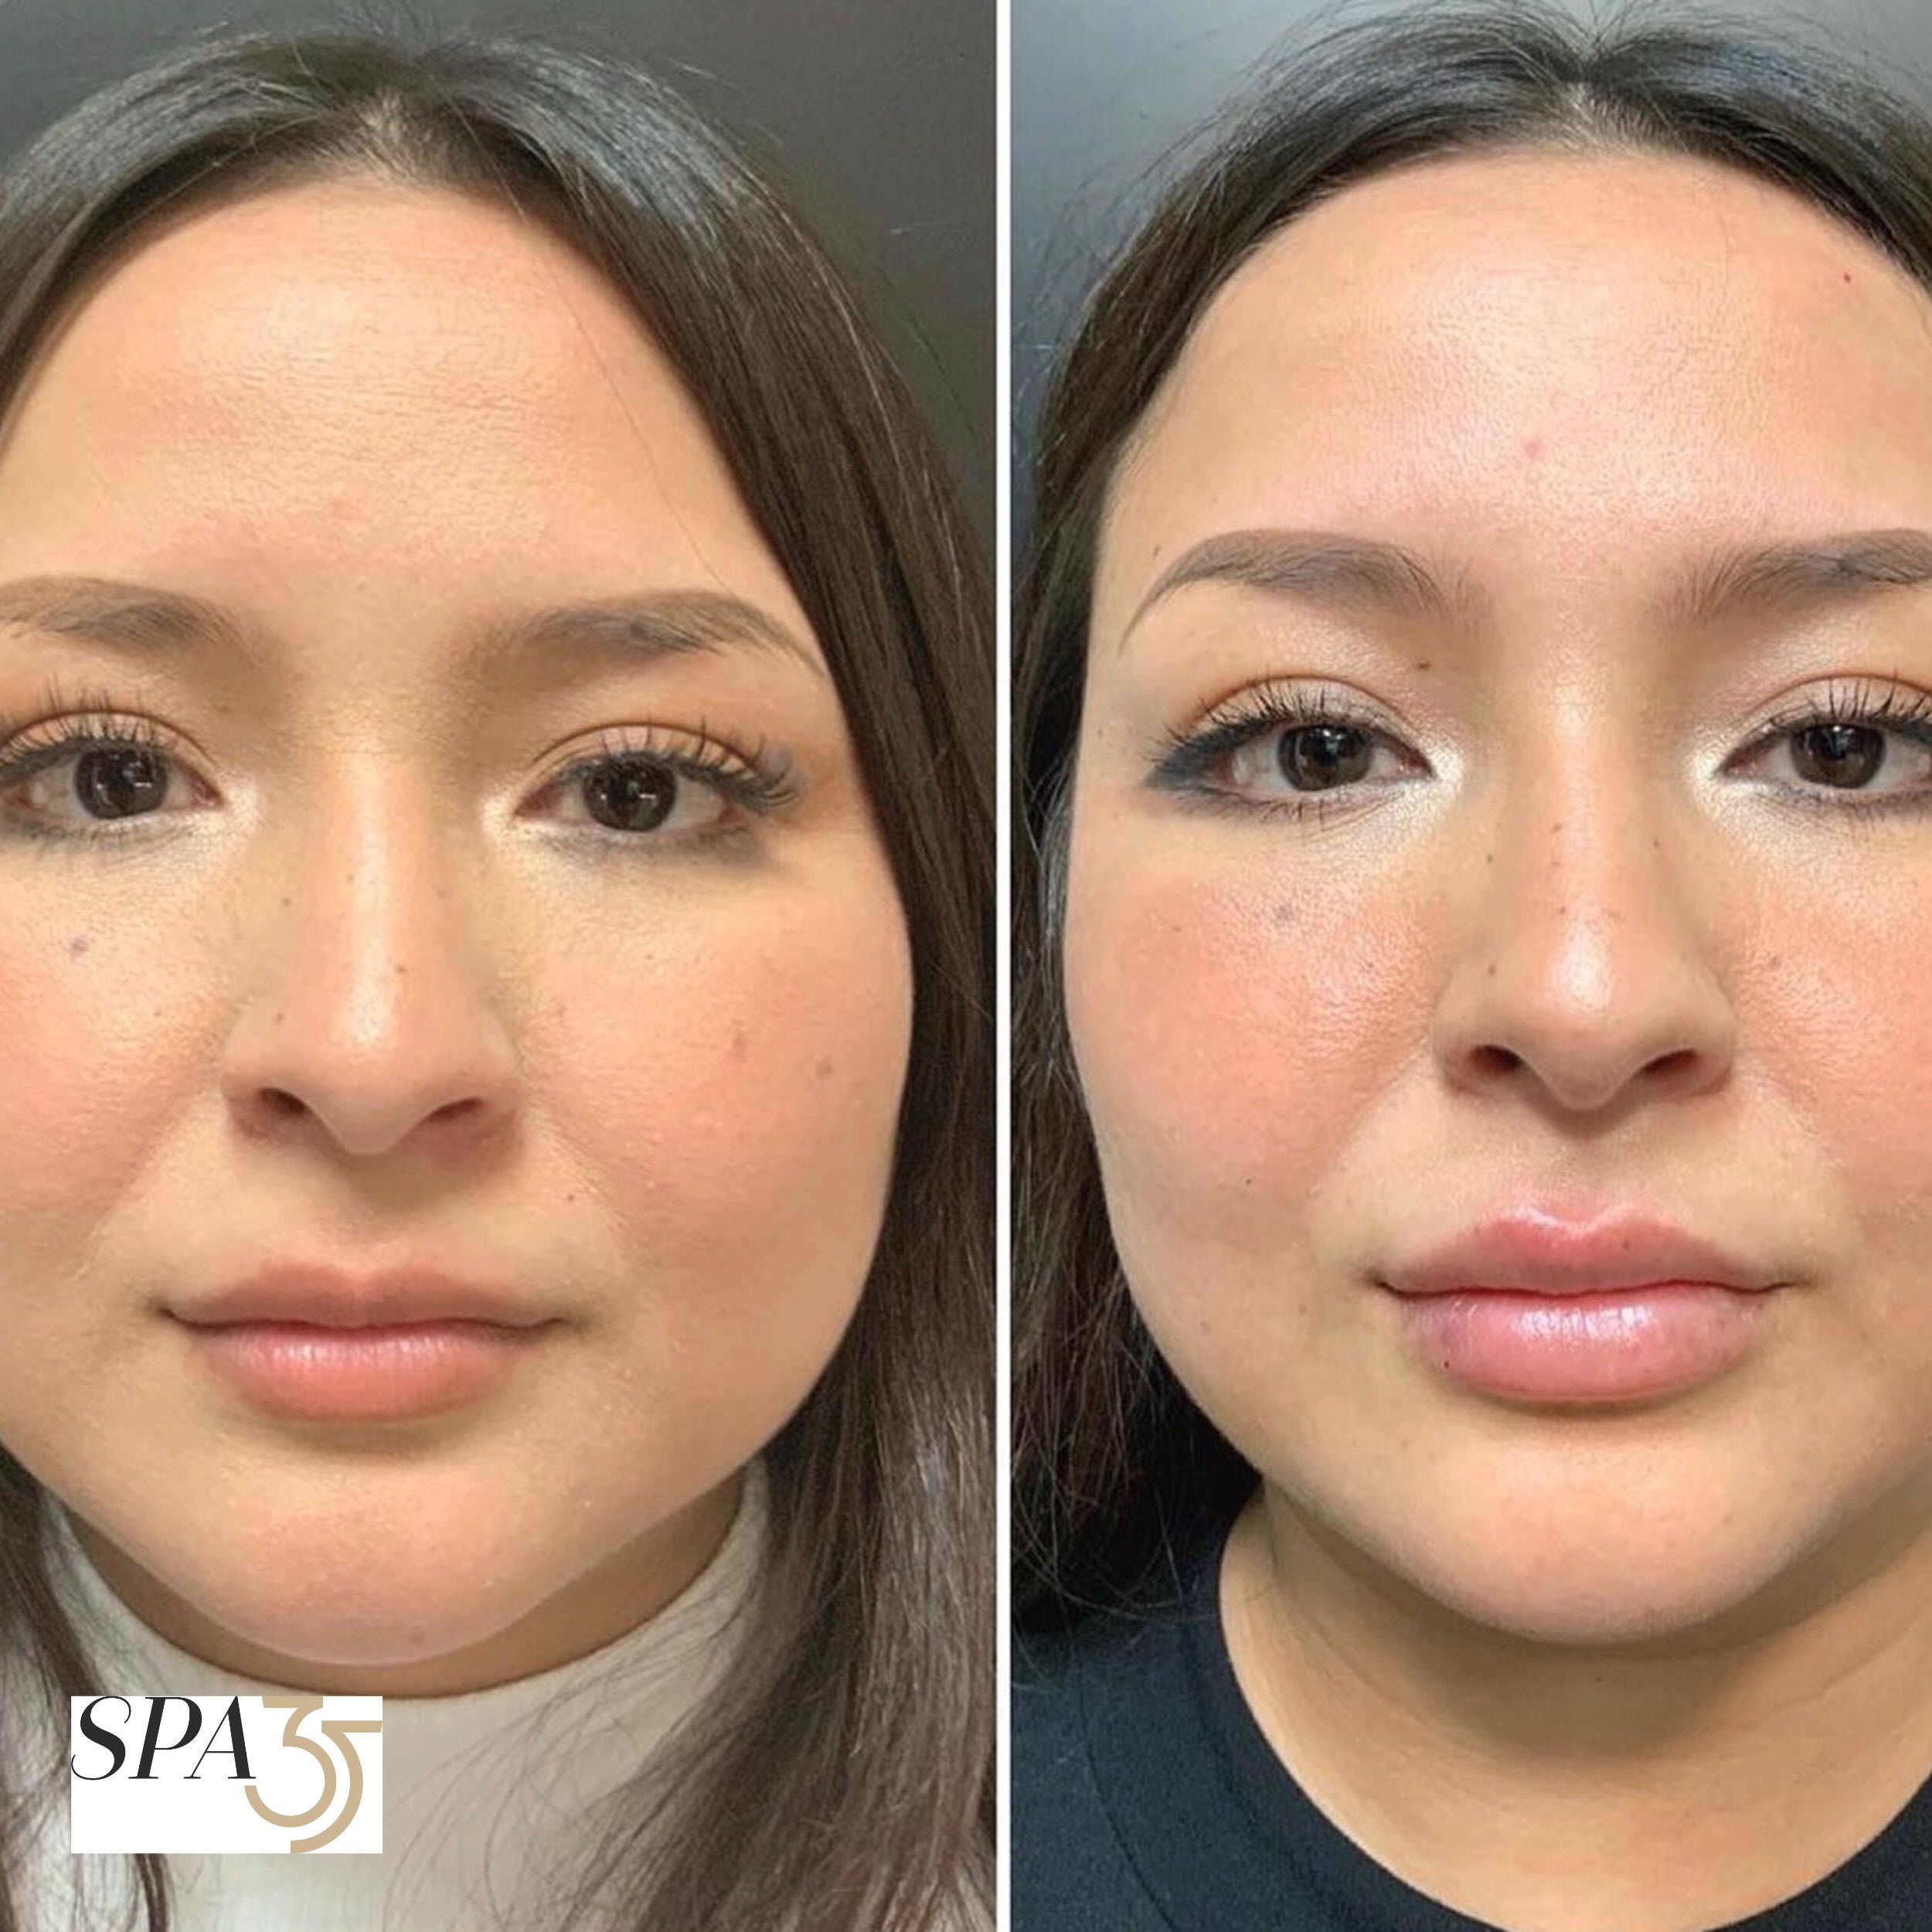 Before and after photos of dermal filler lip injections at Spa 35 Medical Spa